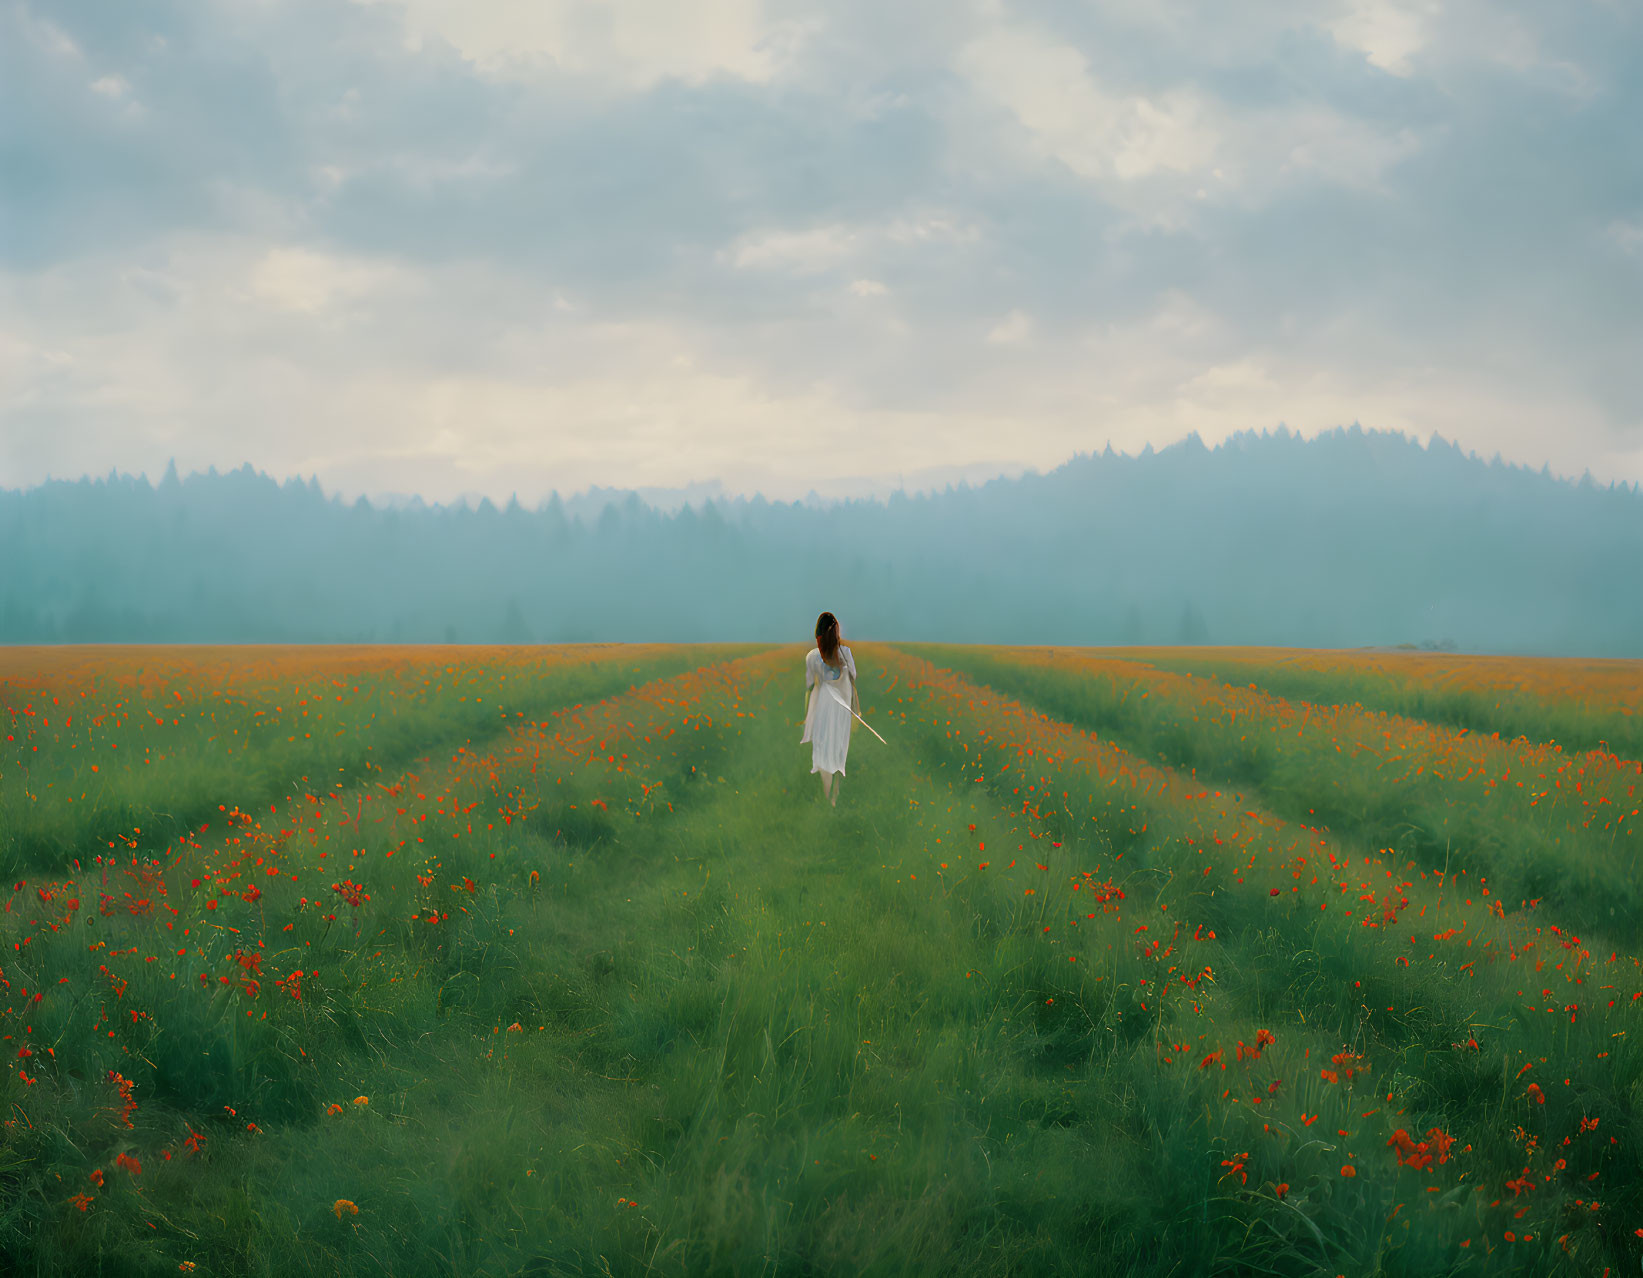 Woman in white dress strolling through serene field with misty forests in background